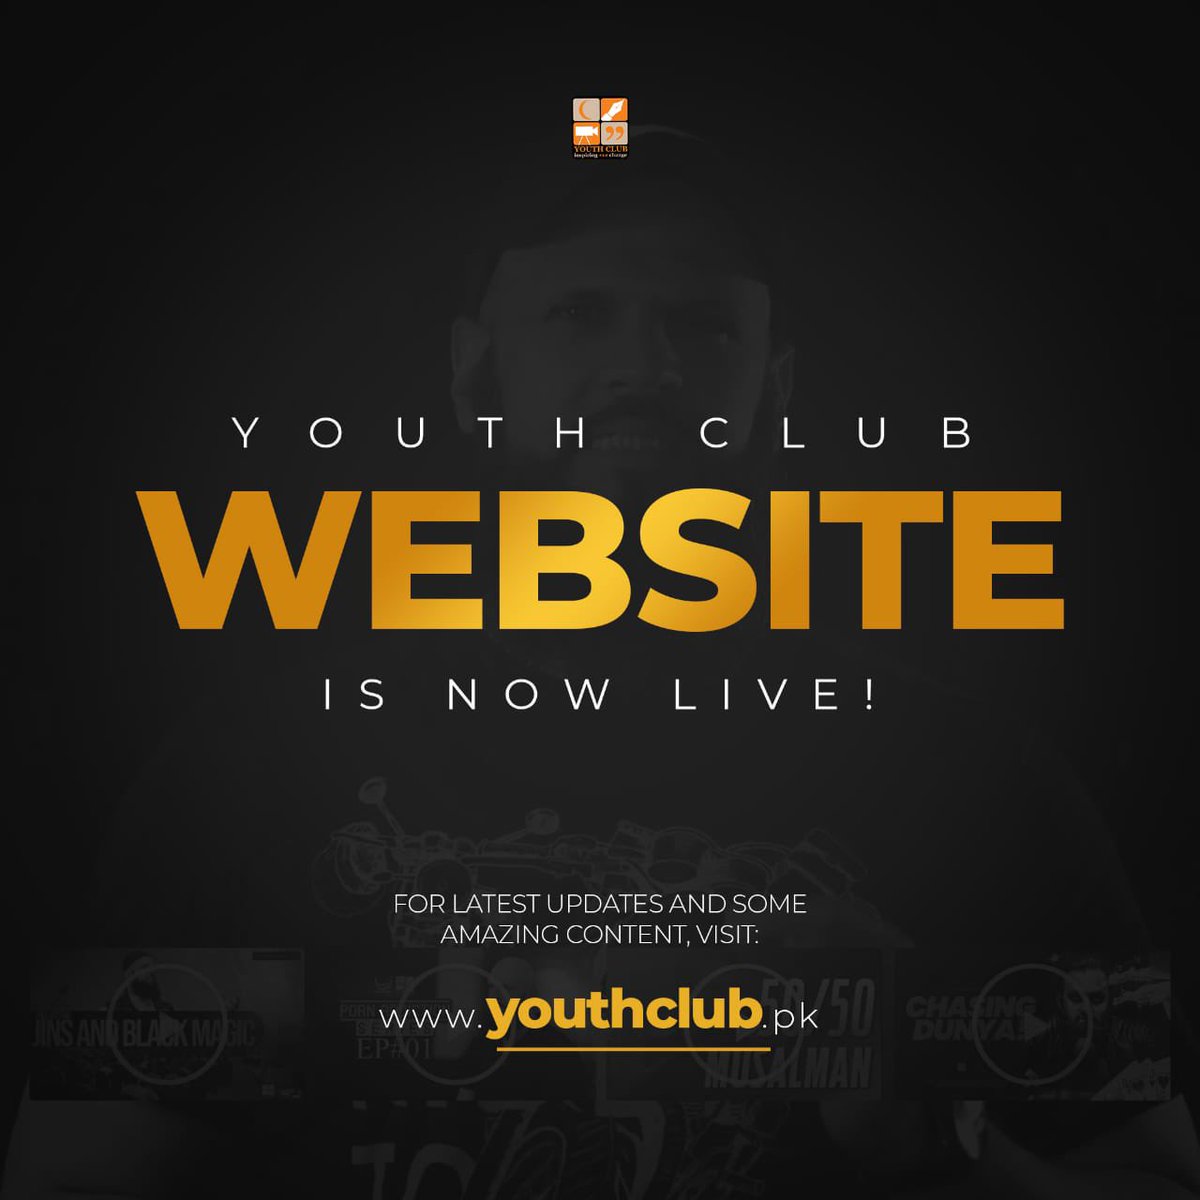 Youth Club Youthclubpk Twitter